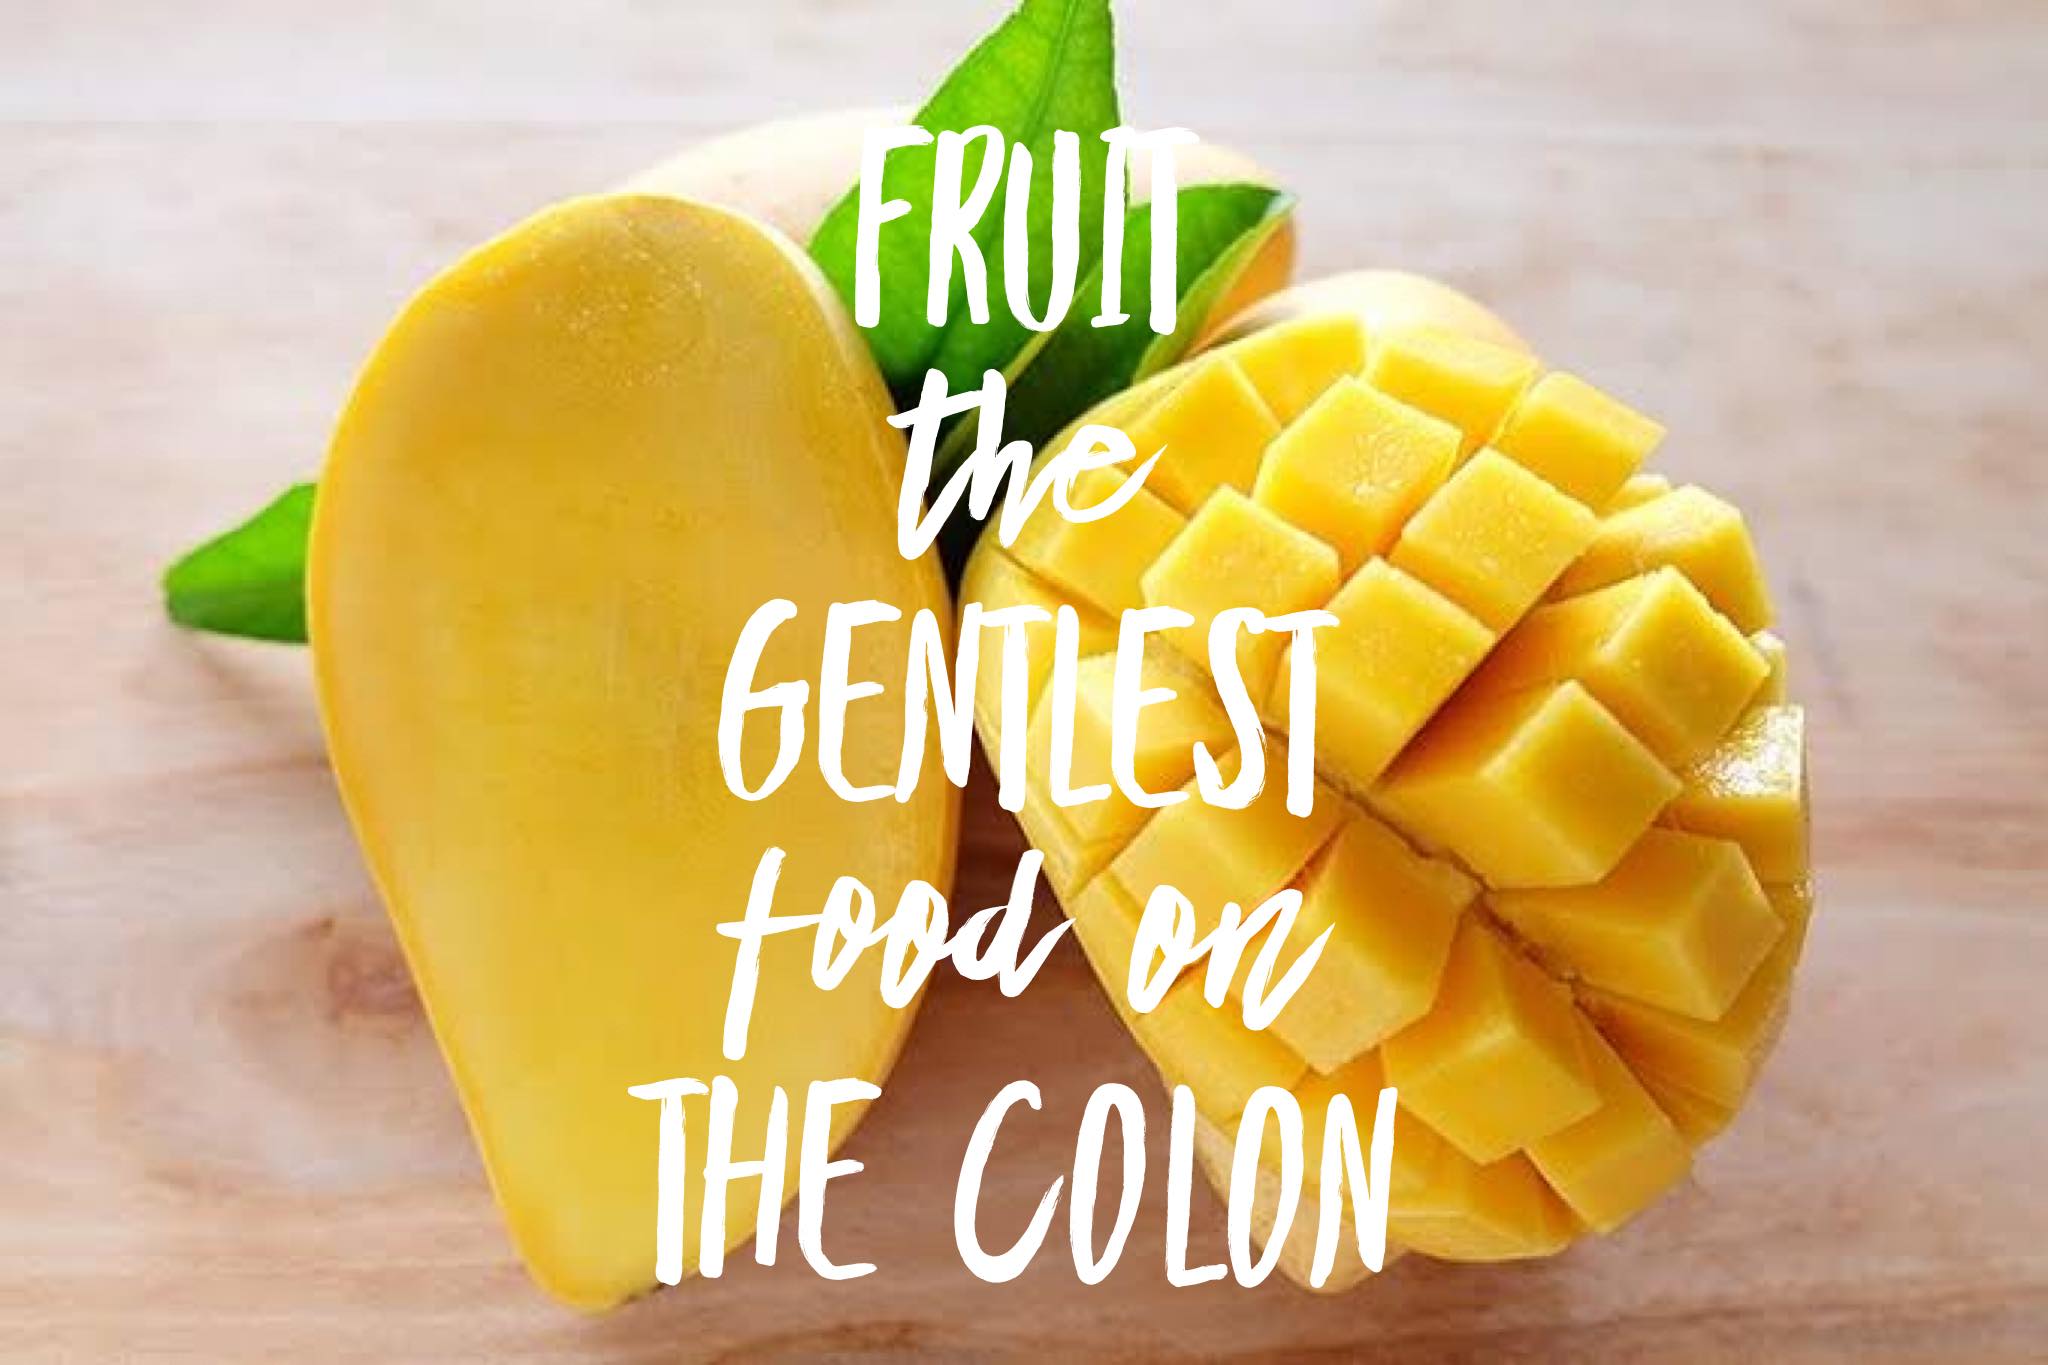 Fruit the gentlest food for colon health